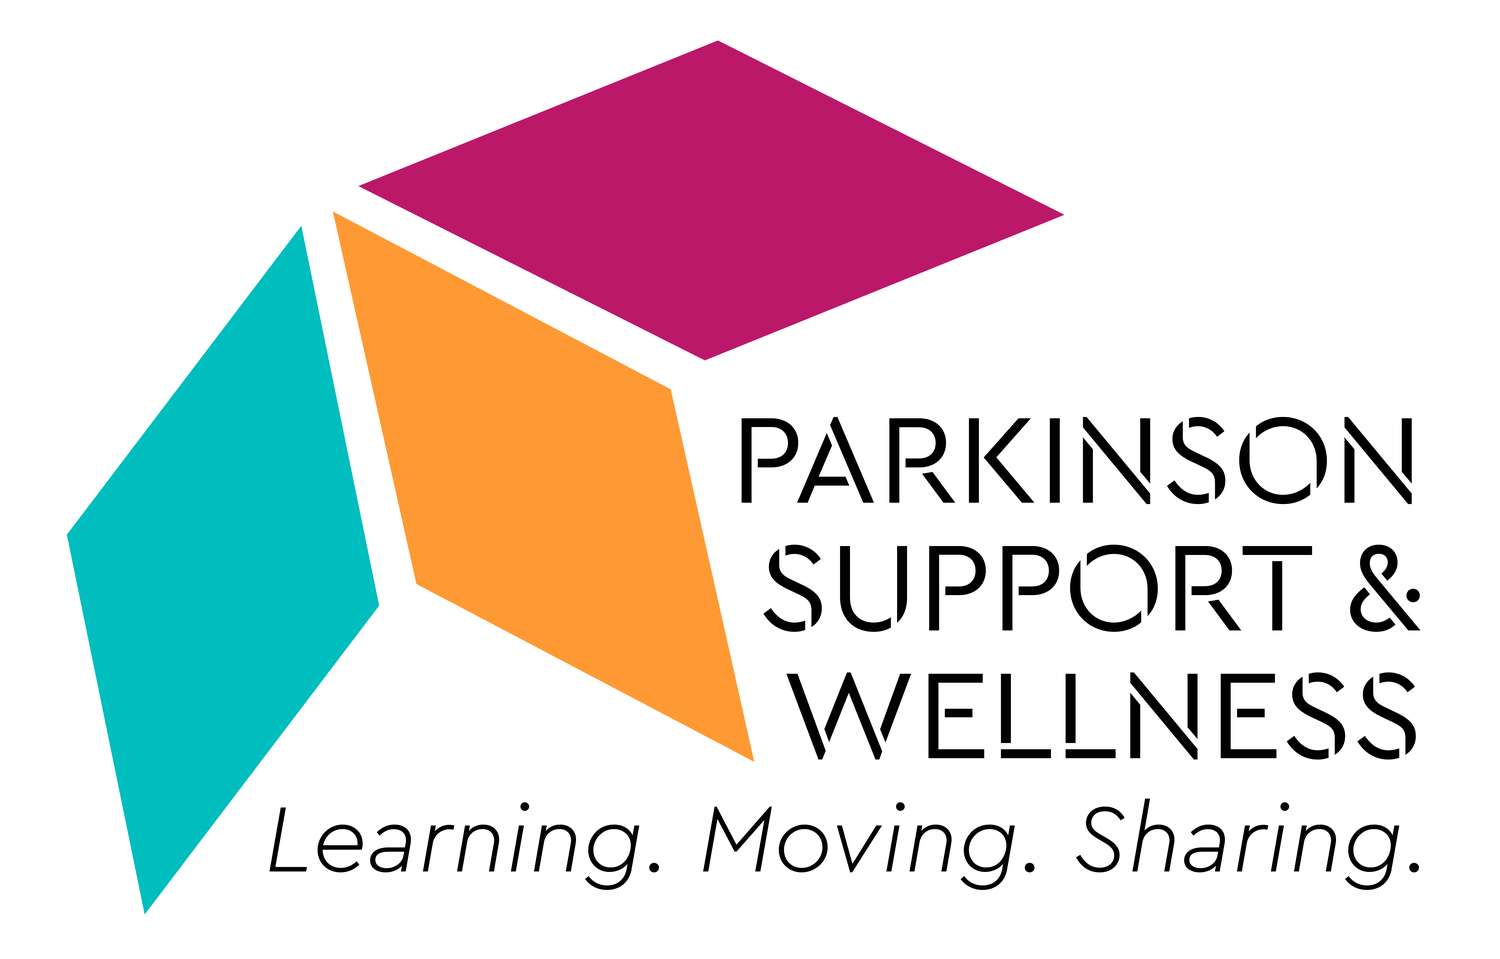 Parkinson Support and Wellness